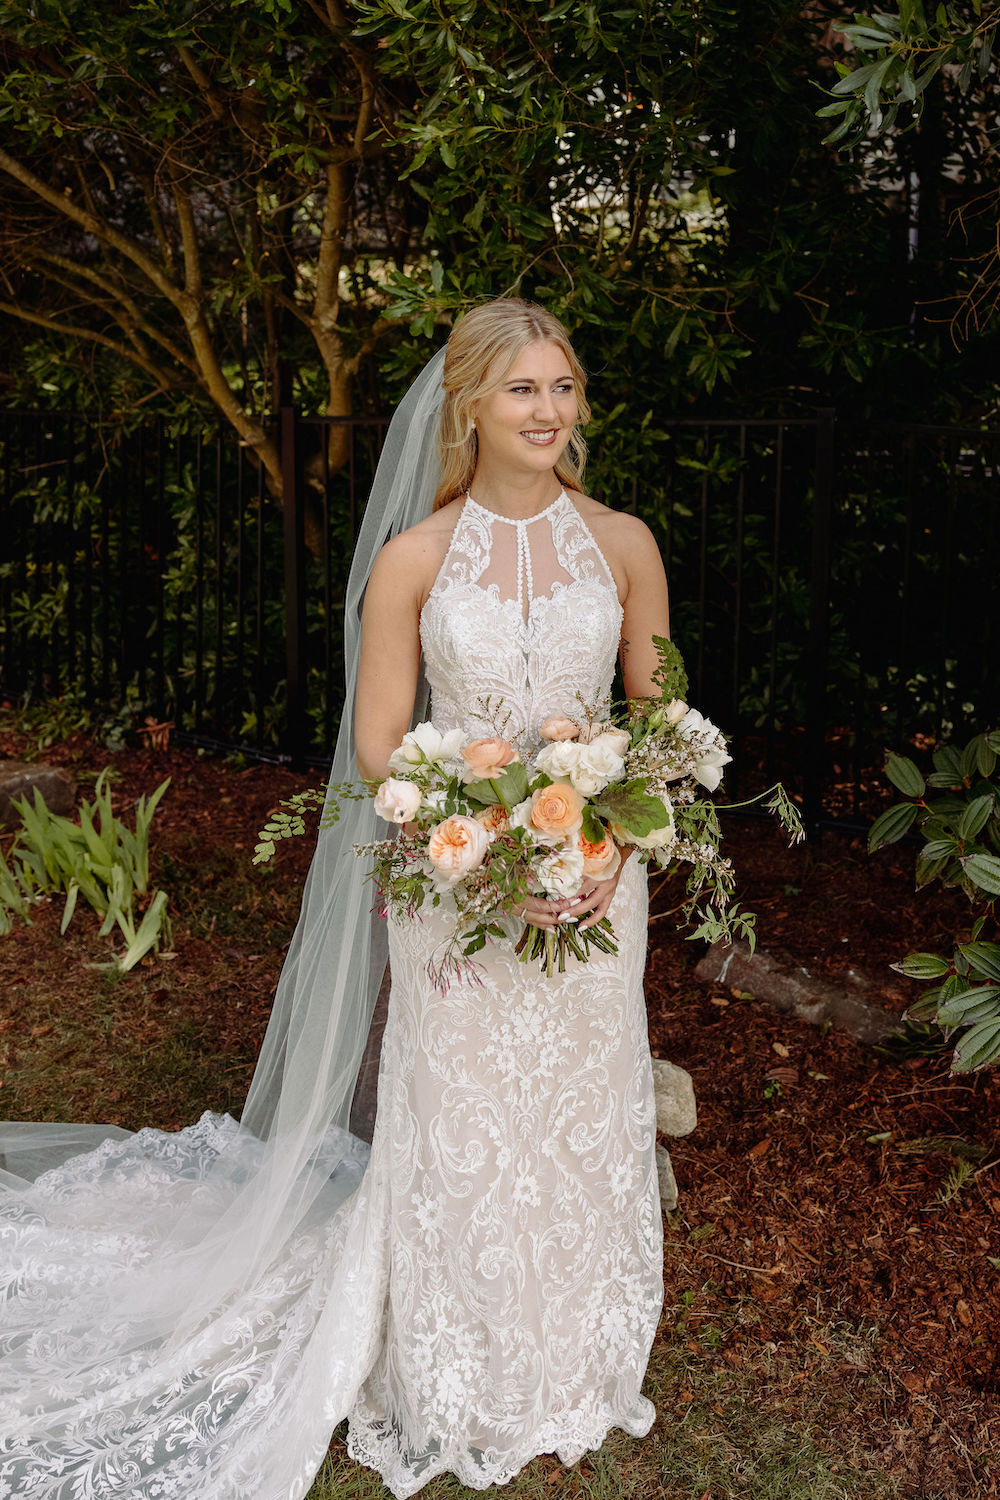 Bride in her long lace dress with a long veil holding her bouquet of peach garden roses, peach ranunculus, white spray roses, jasmine vine, cream roses, and geranium foliage